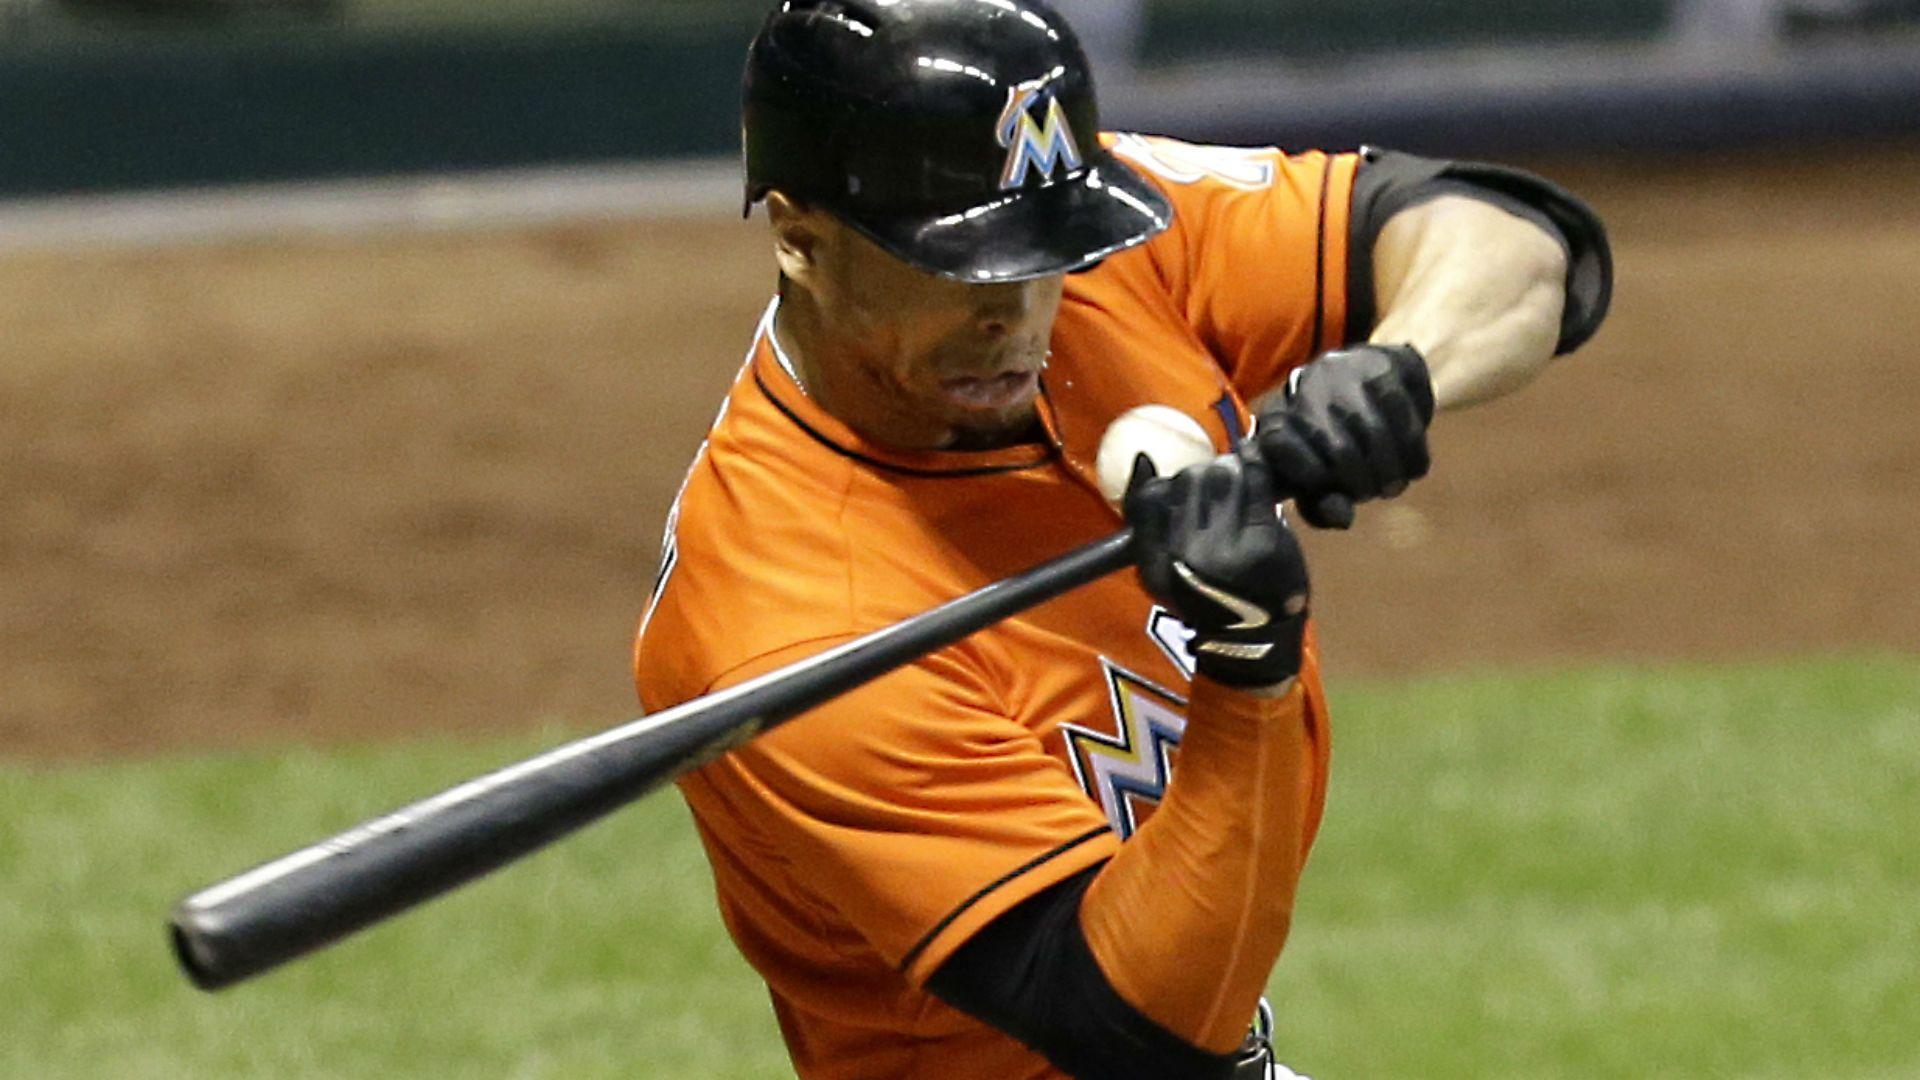 Marlins' Giancarlo Stanton introduces helmet with faceguard. MLB